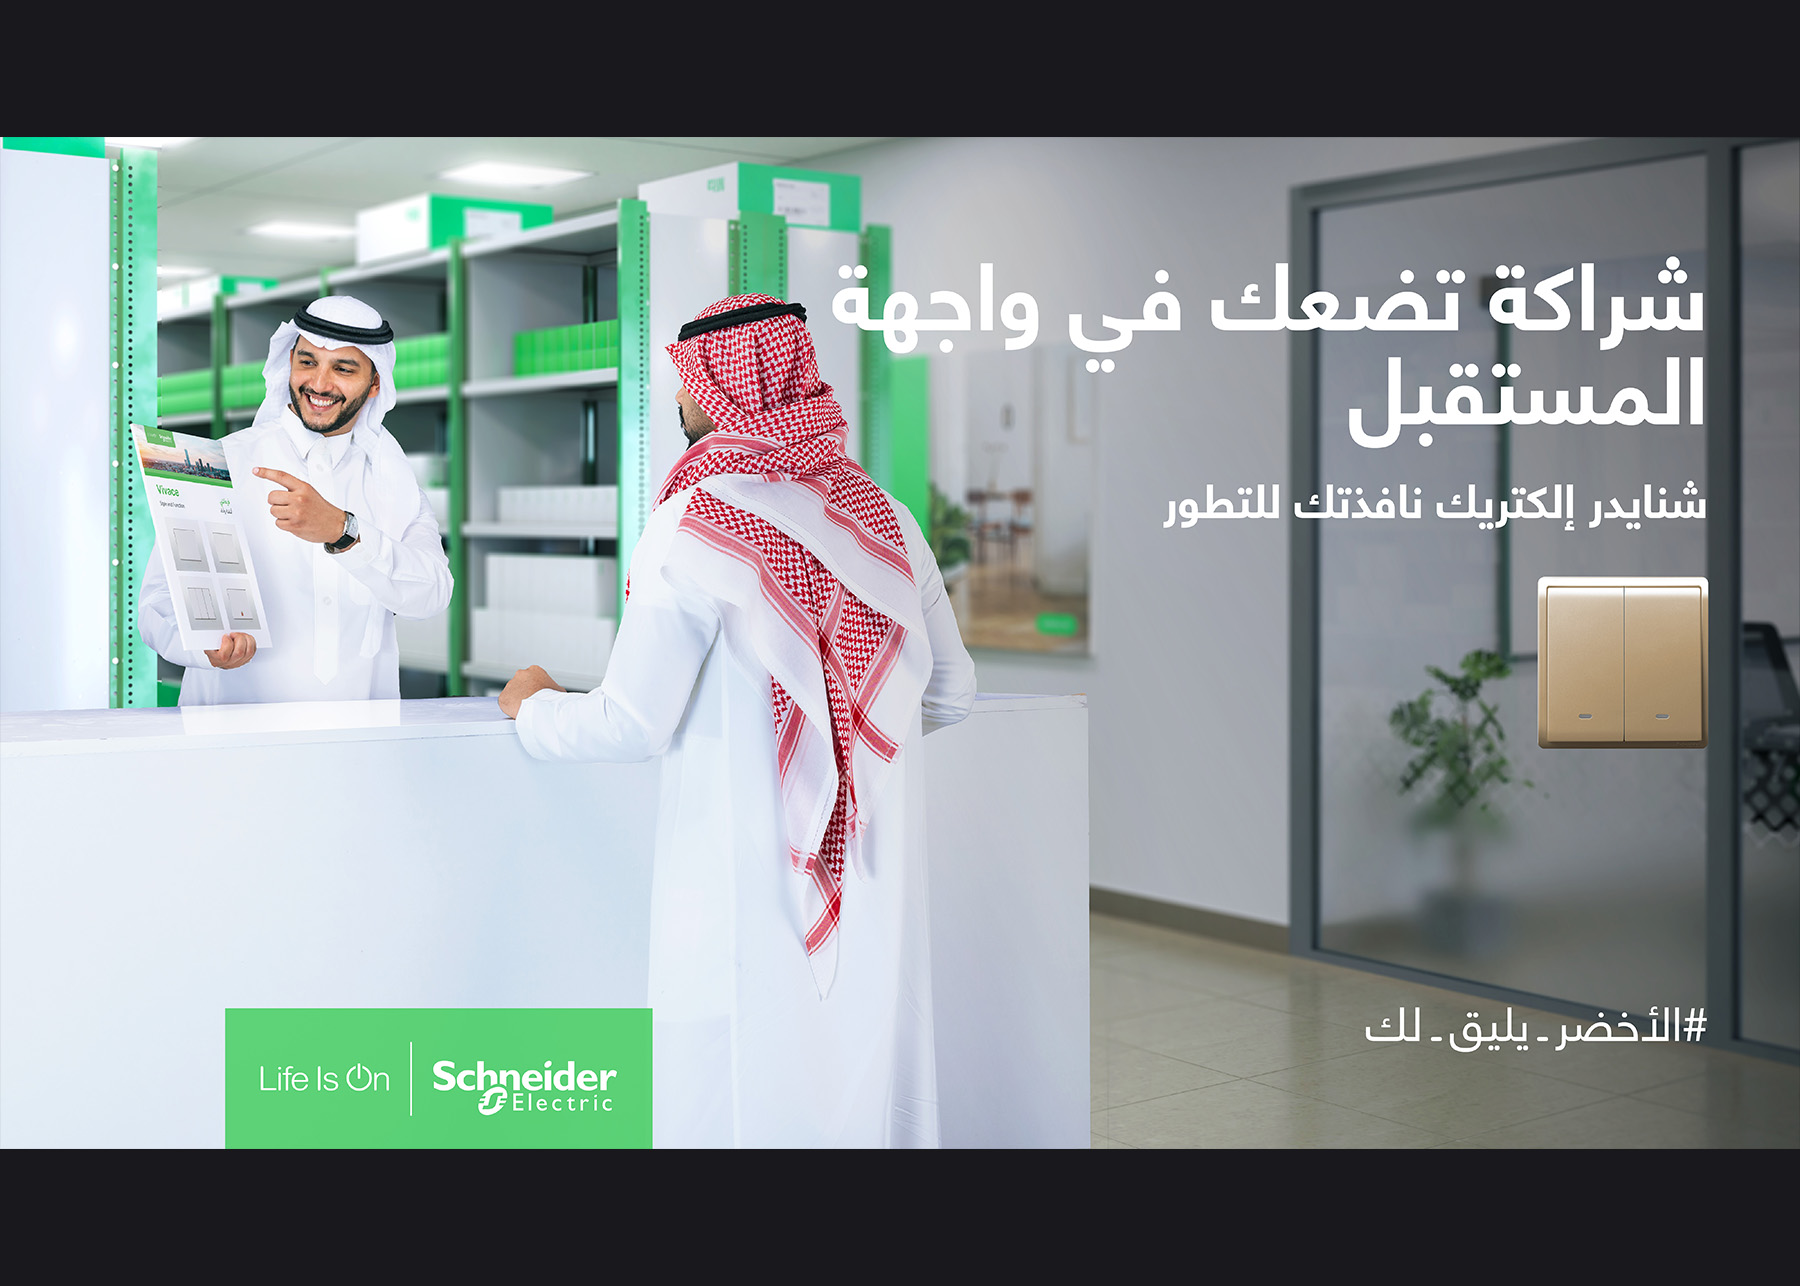 Post for Schneider Electric campaign